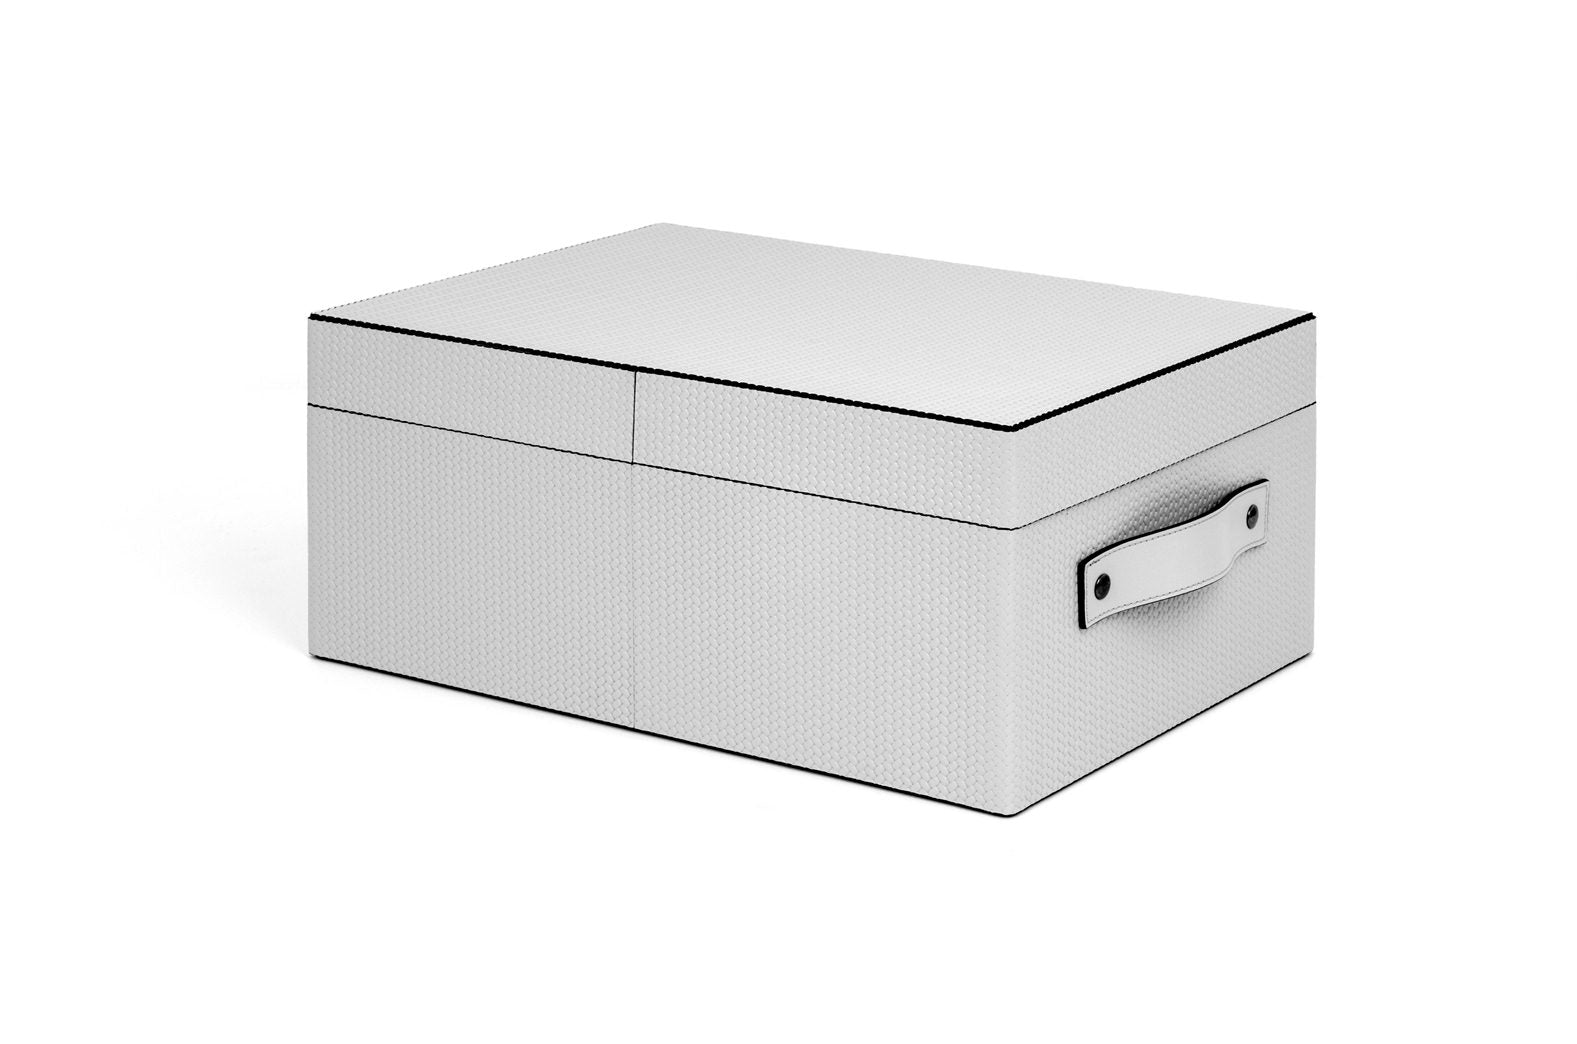 Avio Leather-Covered Storage Box | Strong and light structure | Covered outside in genuine leather | Find it now at 2Jour Concierge, #1 luxury high-end gift & lifestyle shop